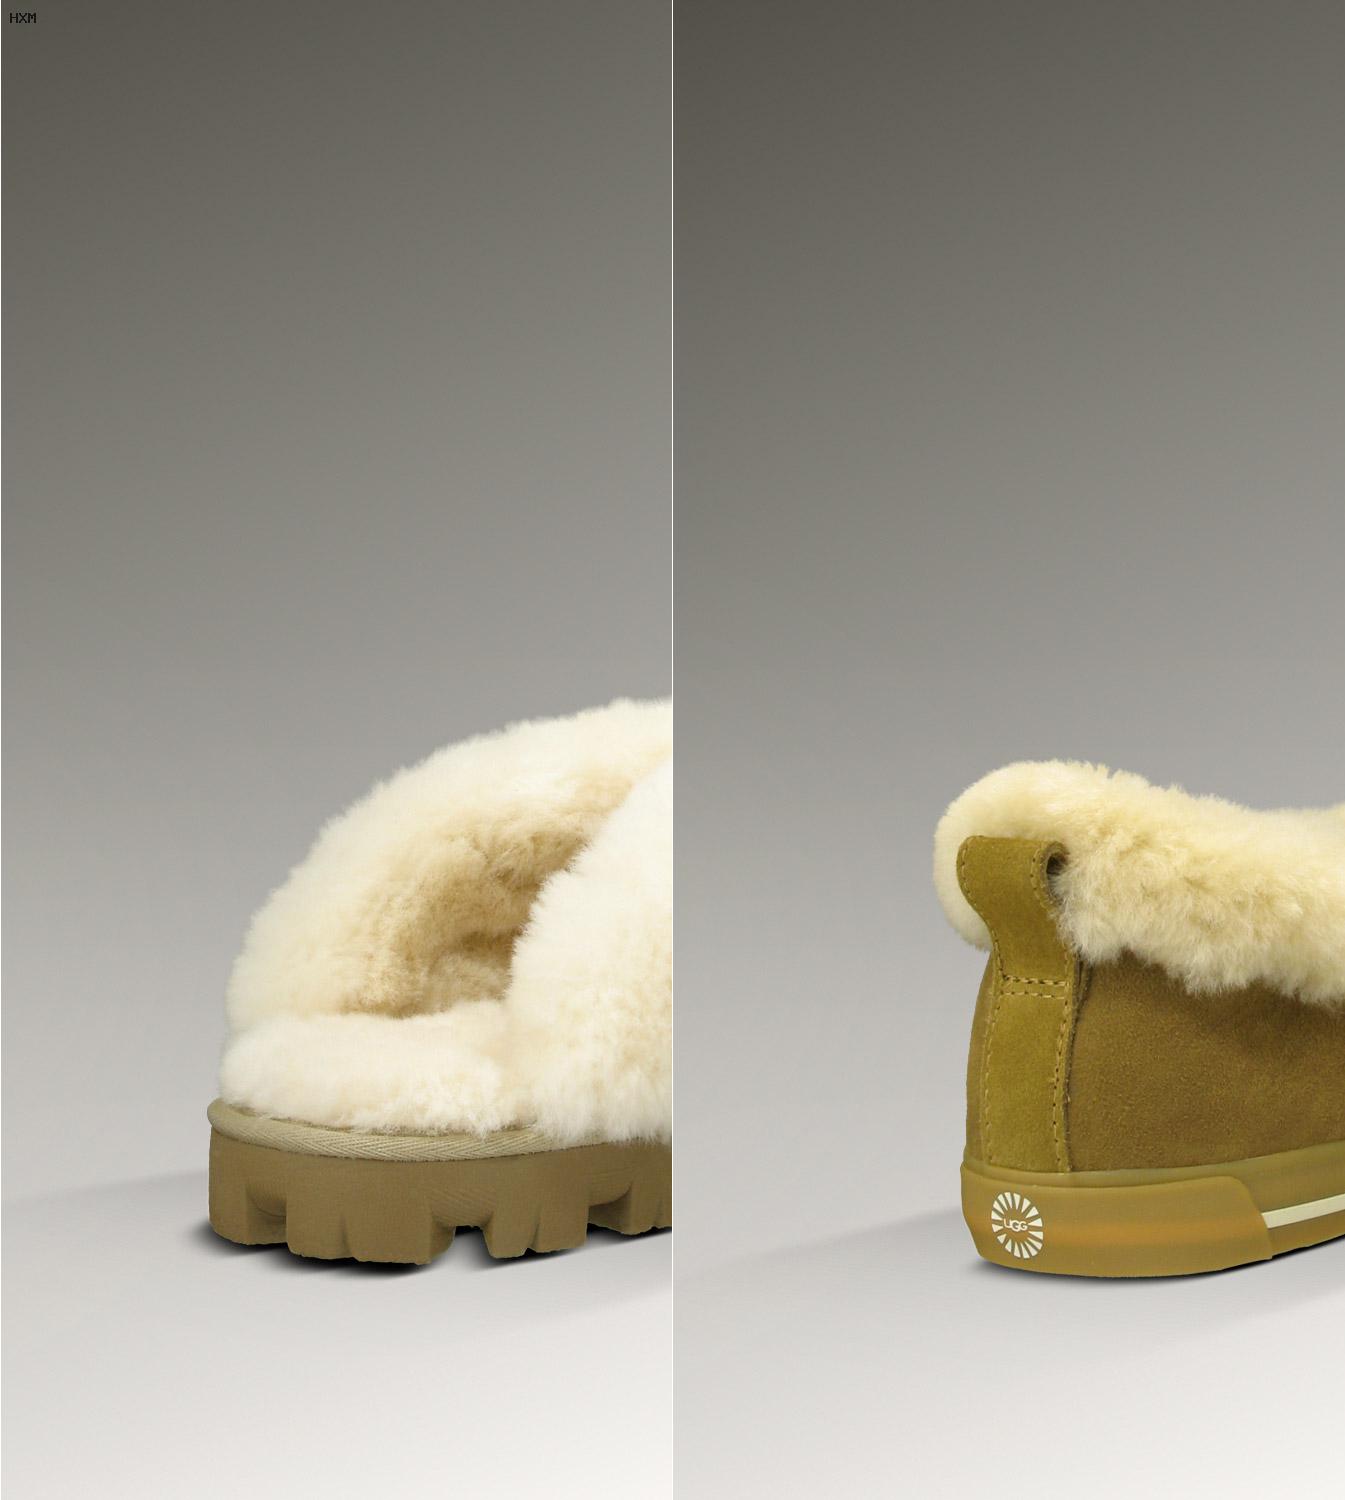 imitation ugg boots offers